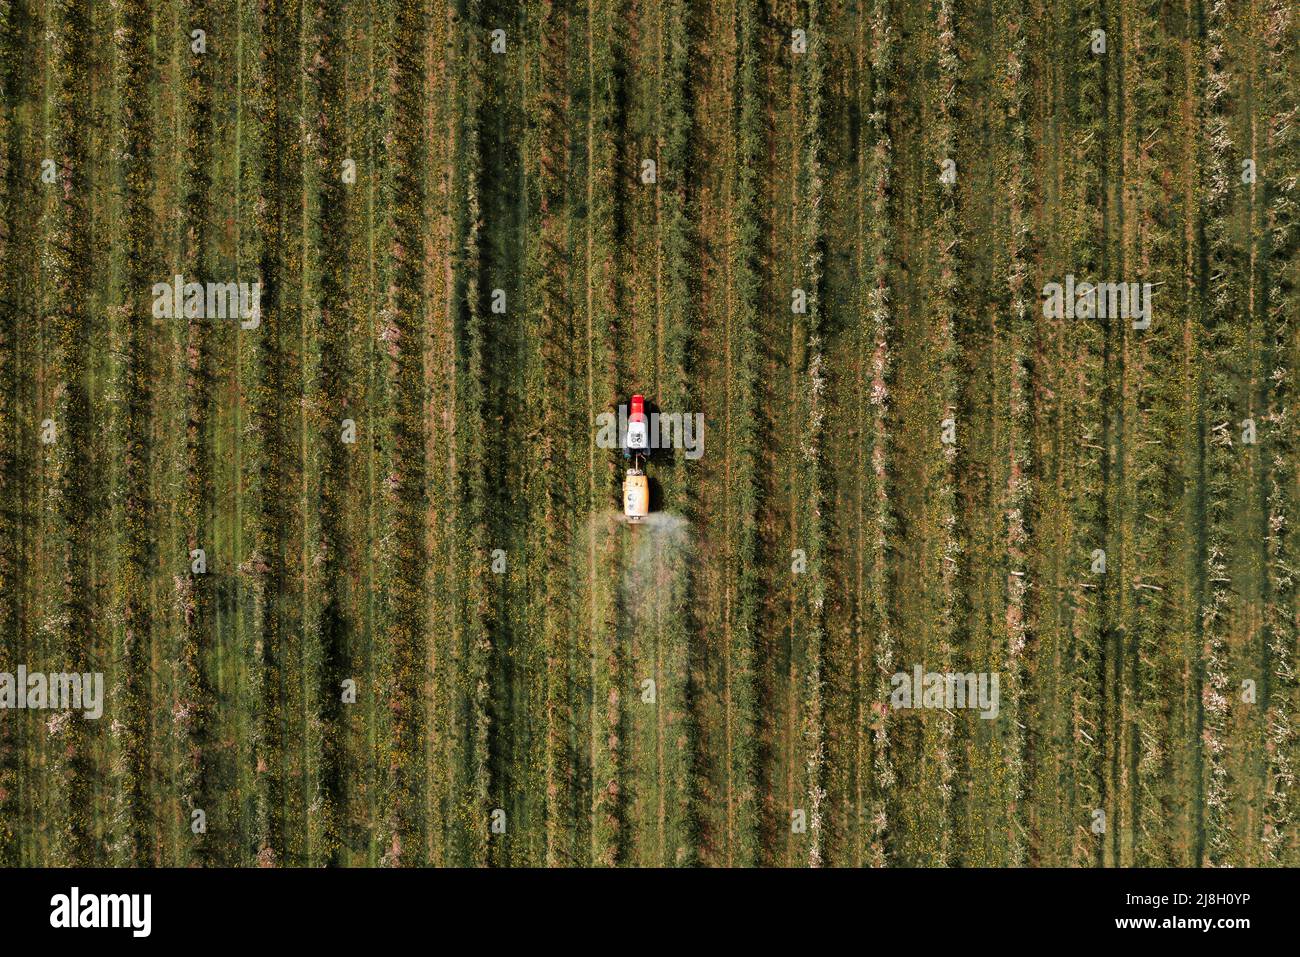 Aerial view of agricultural tractor with crop sprayer applying insecticide in apple fruit orchard, top view Stock Photo